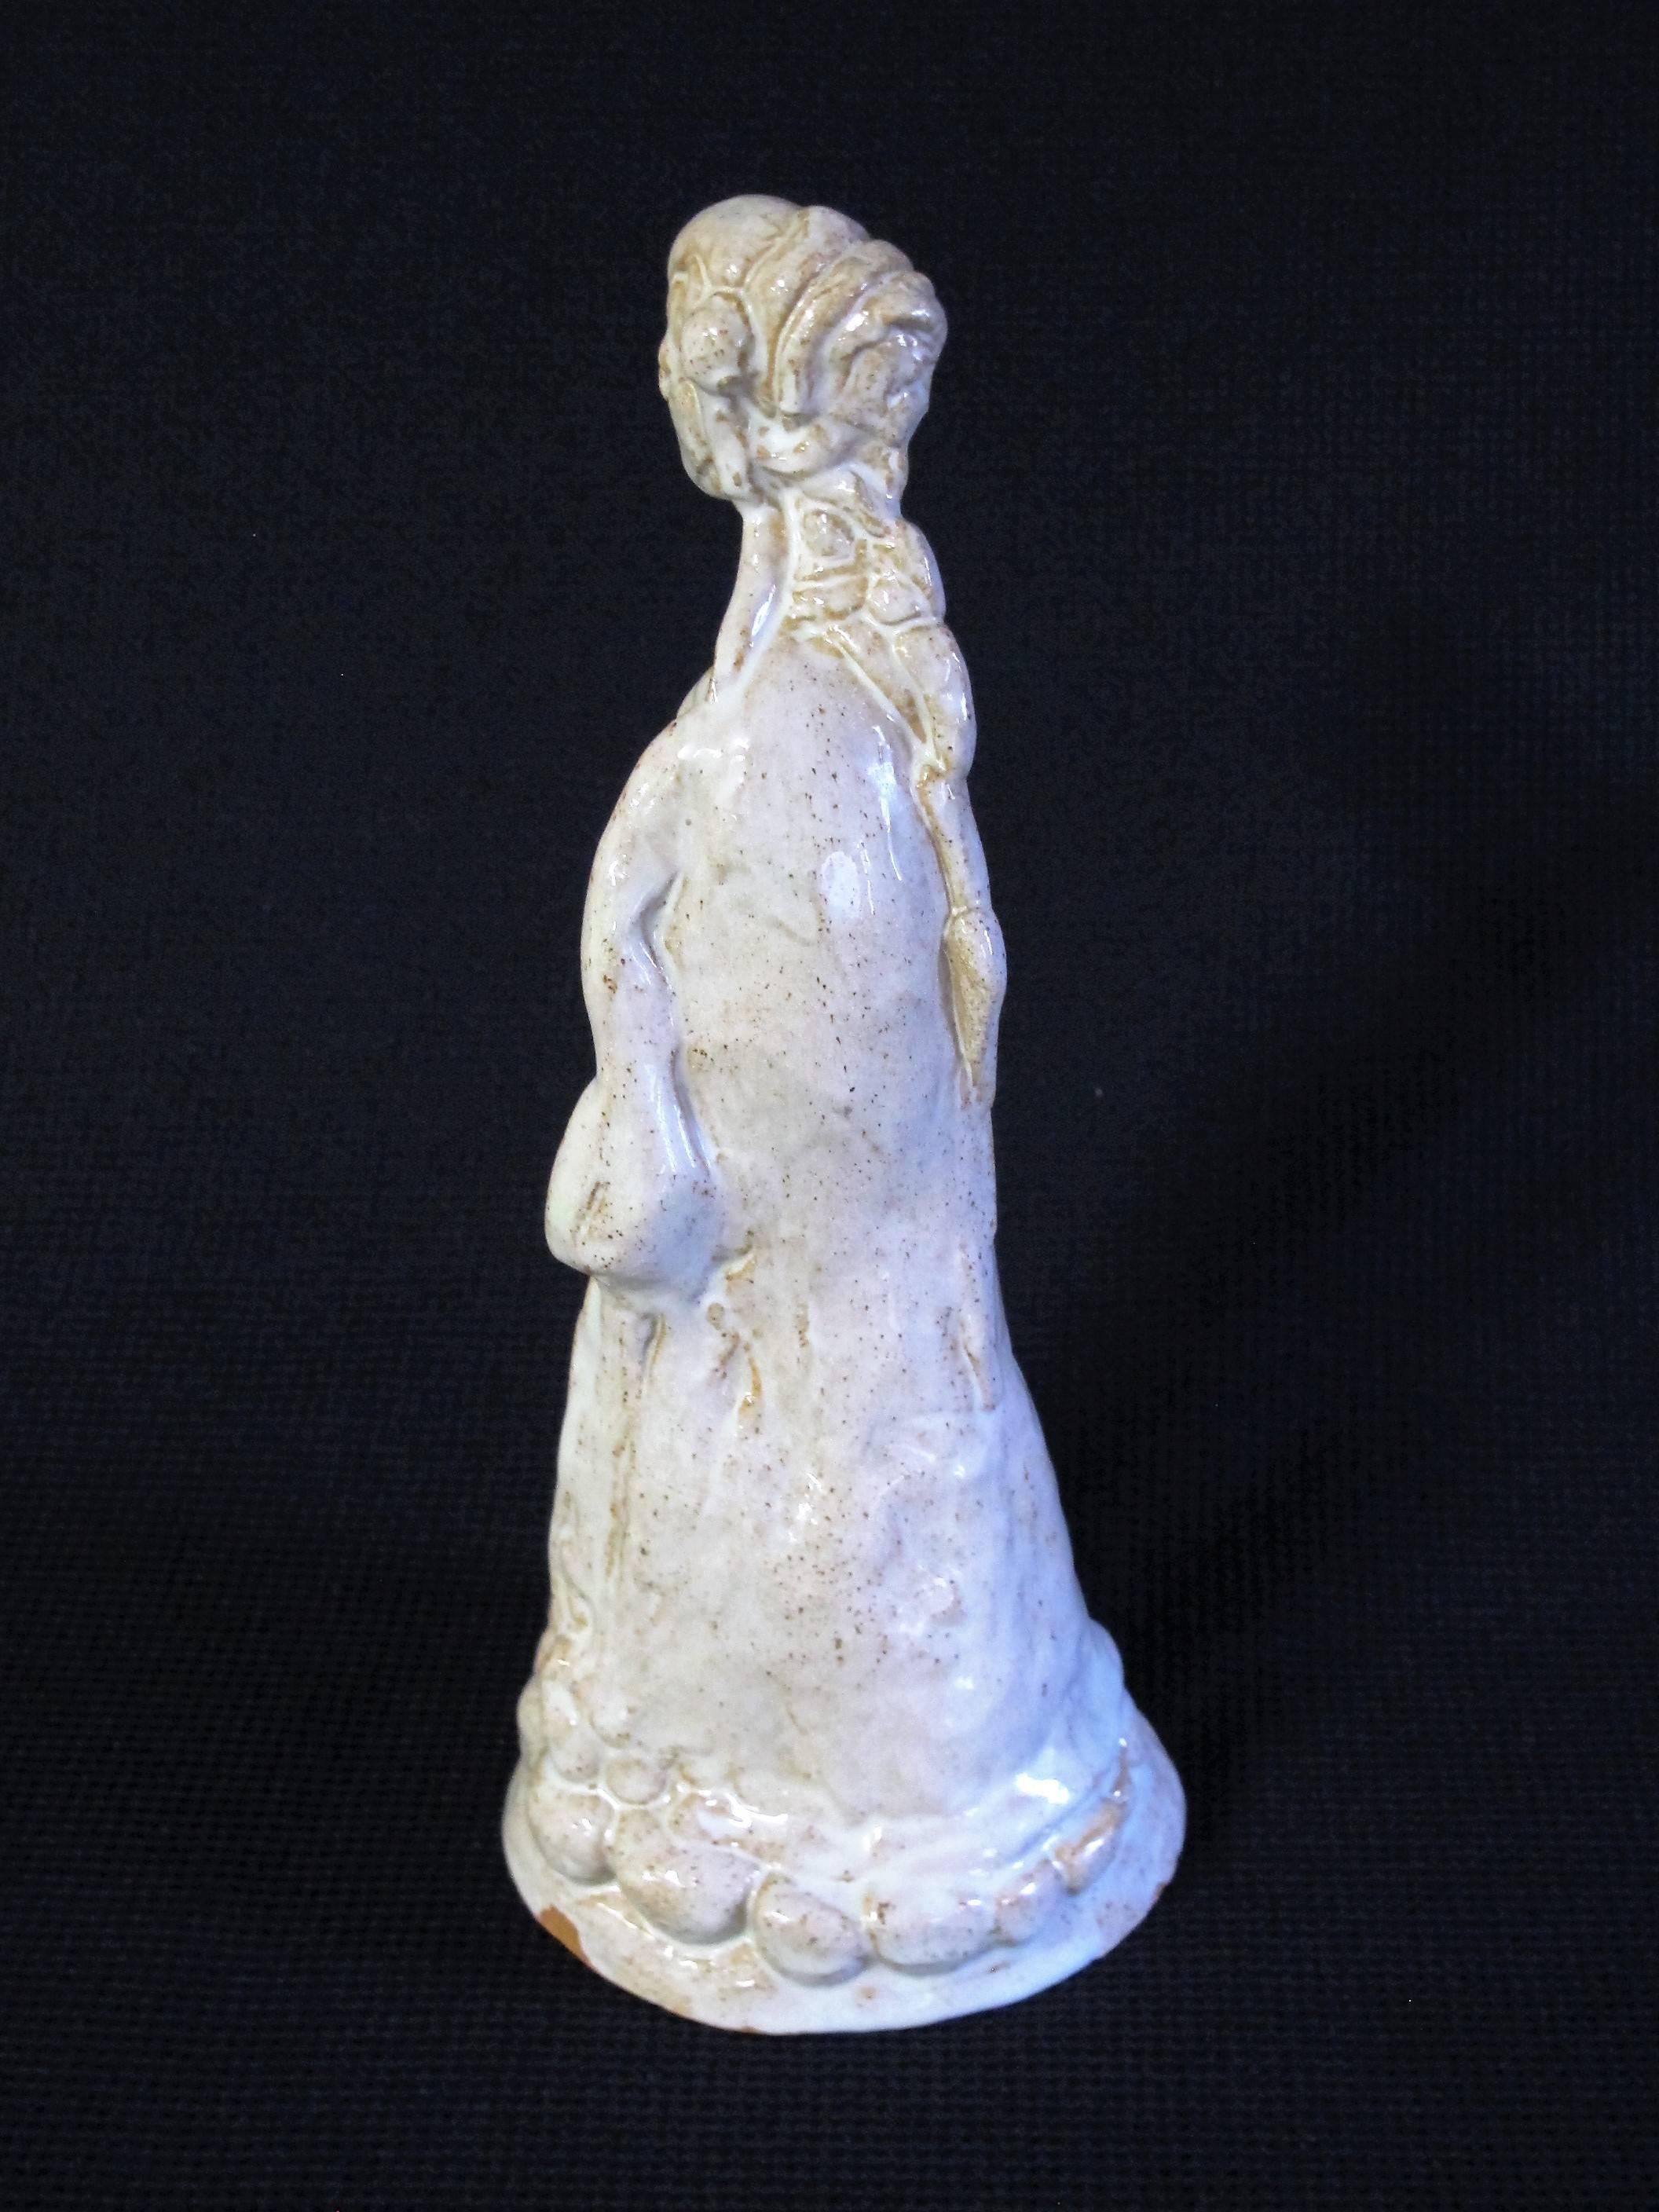 A ceramic sculpture of a woman by Herman Heuff (1875-1945), 1936. The sculpture is glazed in an ivoric white, where the red clay shimmers through.

It is marked on the bottom with black paint: H. HEUFF 1936 M.F.
Carved in the bottom is the mark